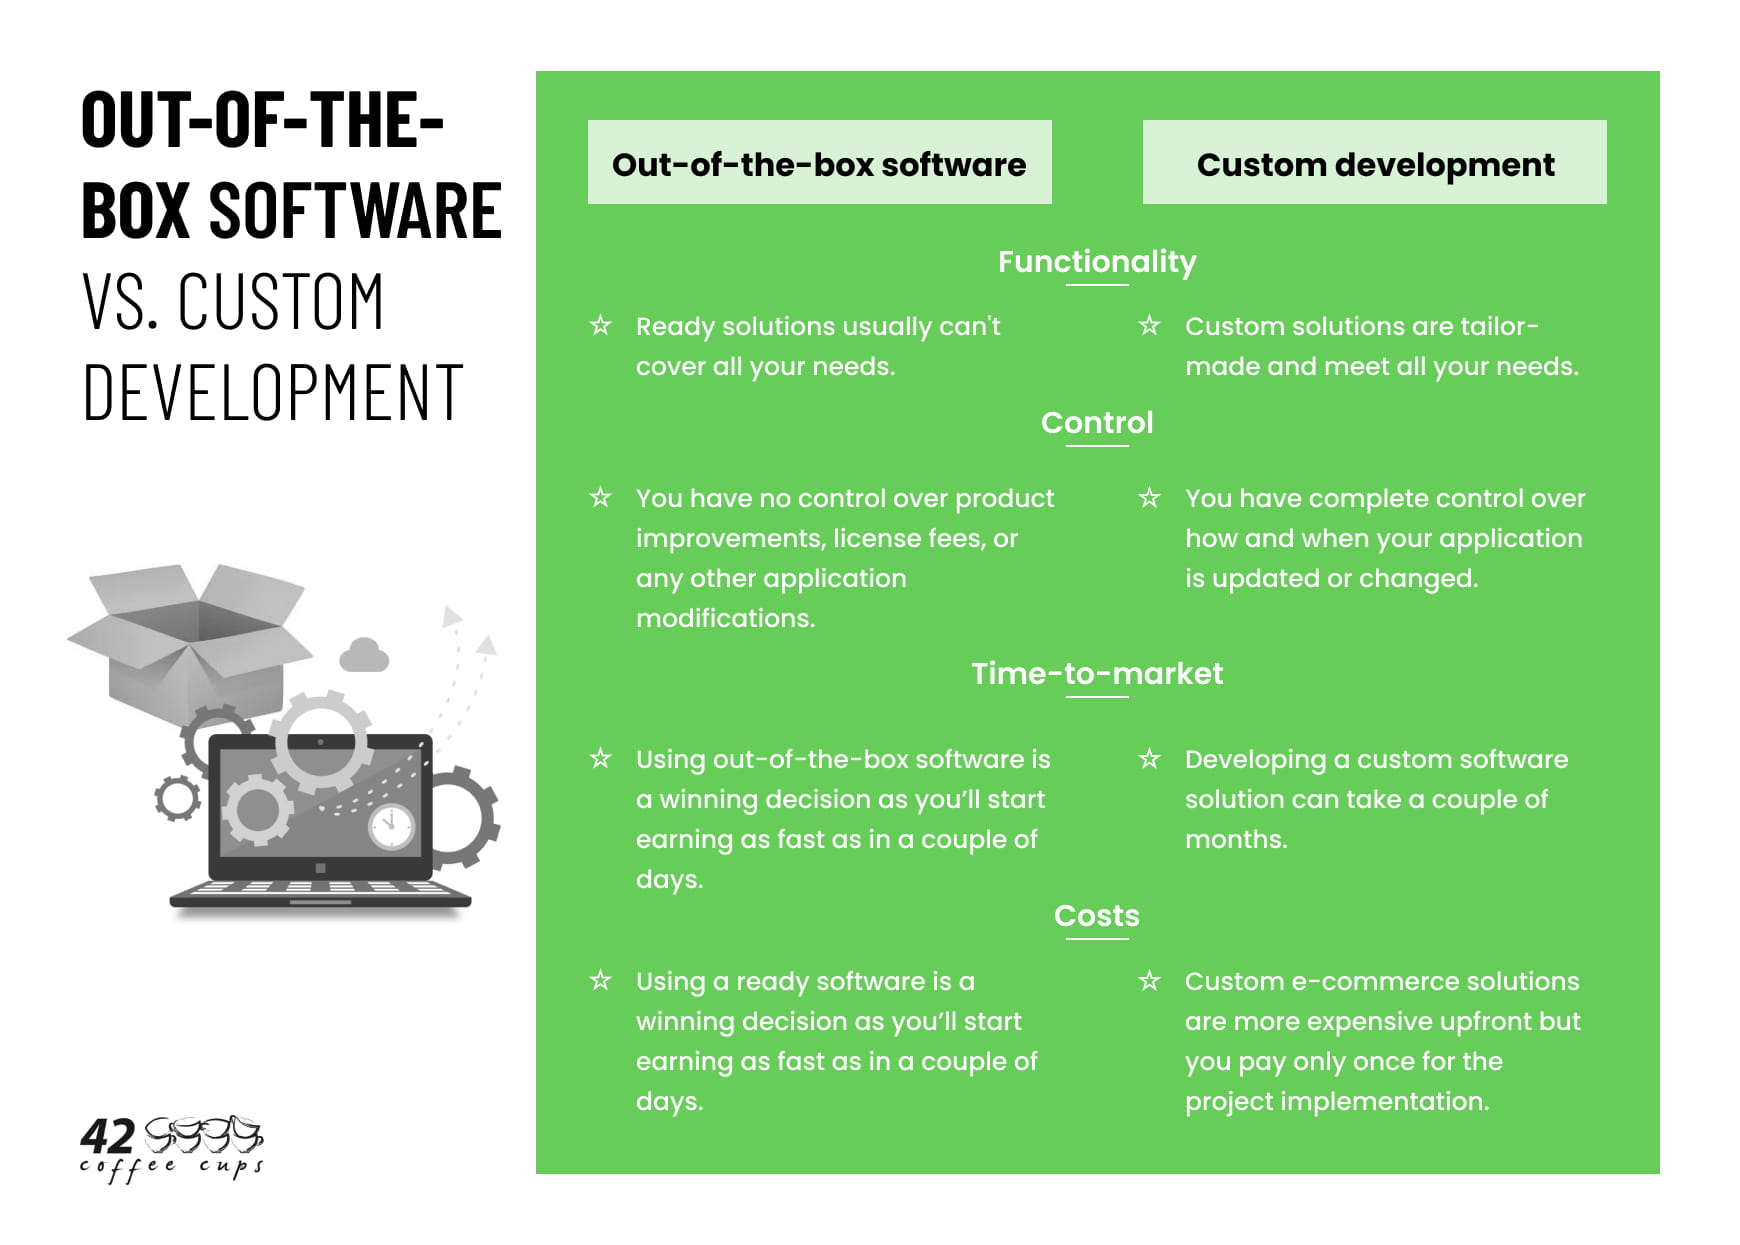 Out-Of-The-Box vs. Custom Software - what are the difference?